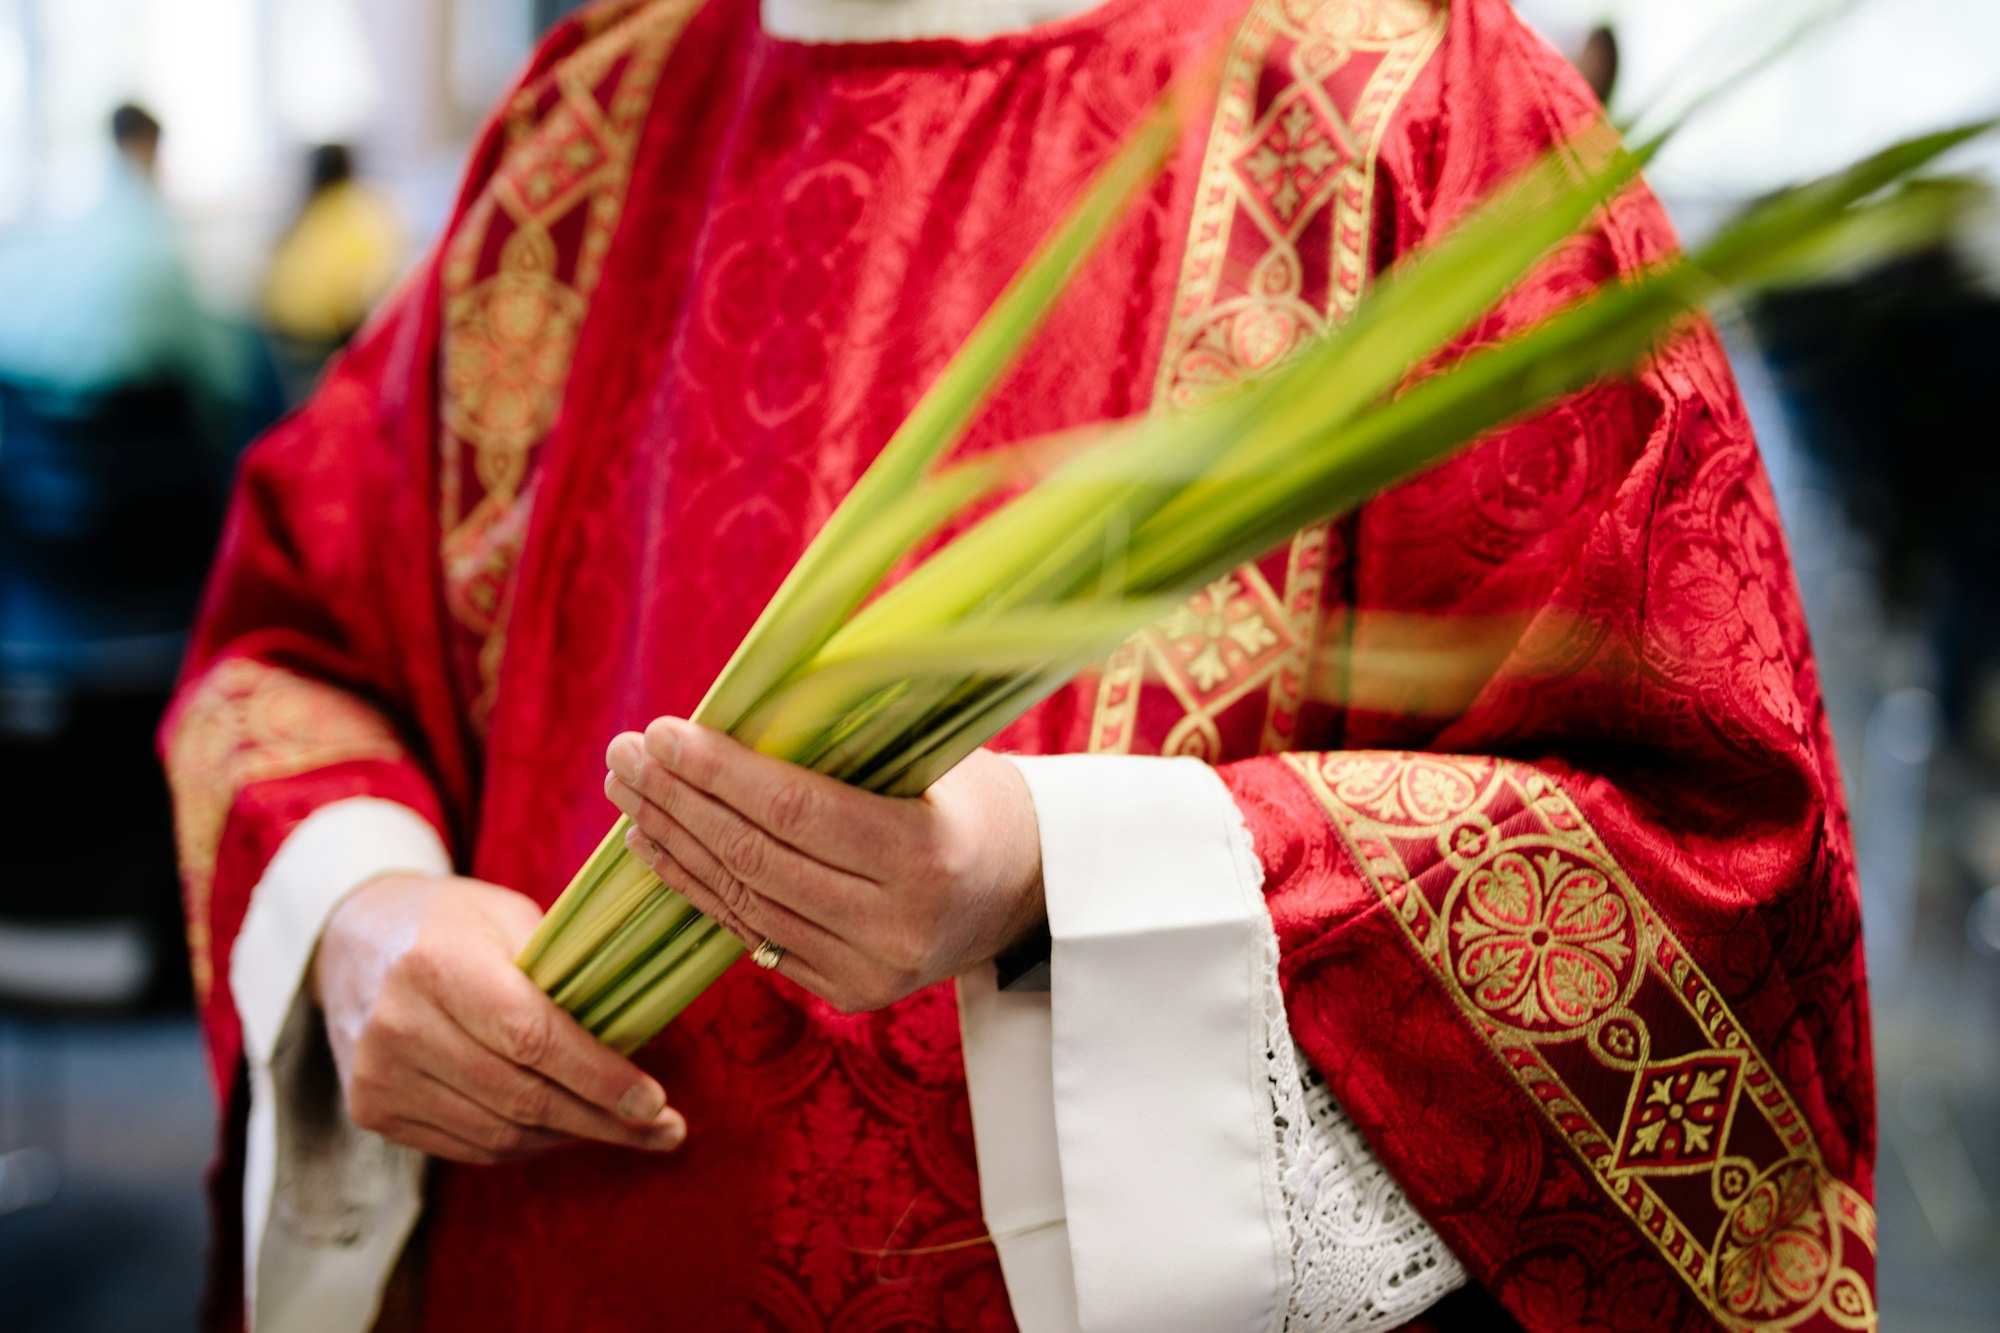 CF66 – Holy Week and Praying with the Church